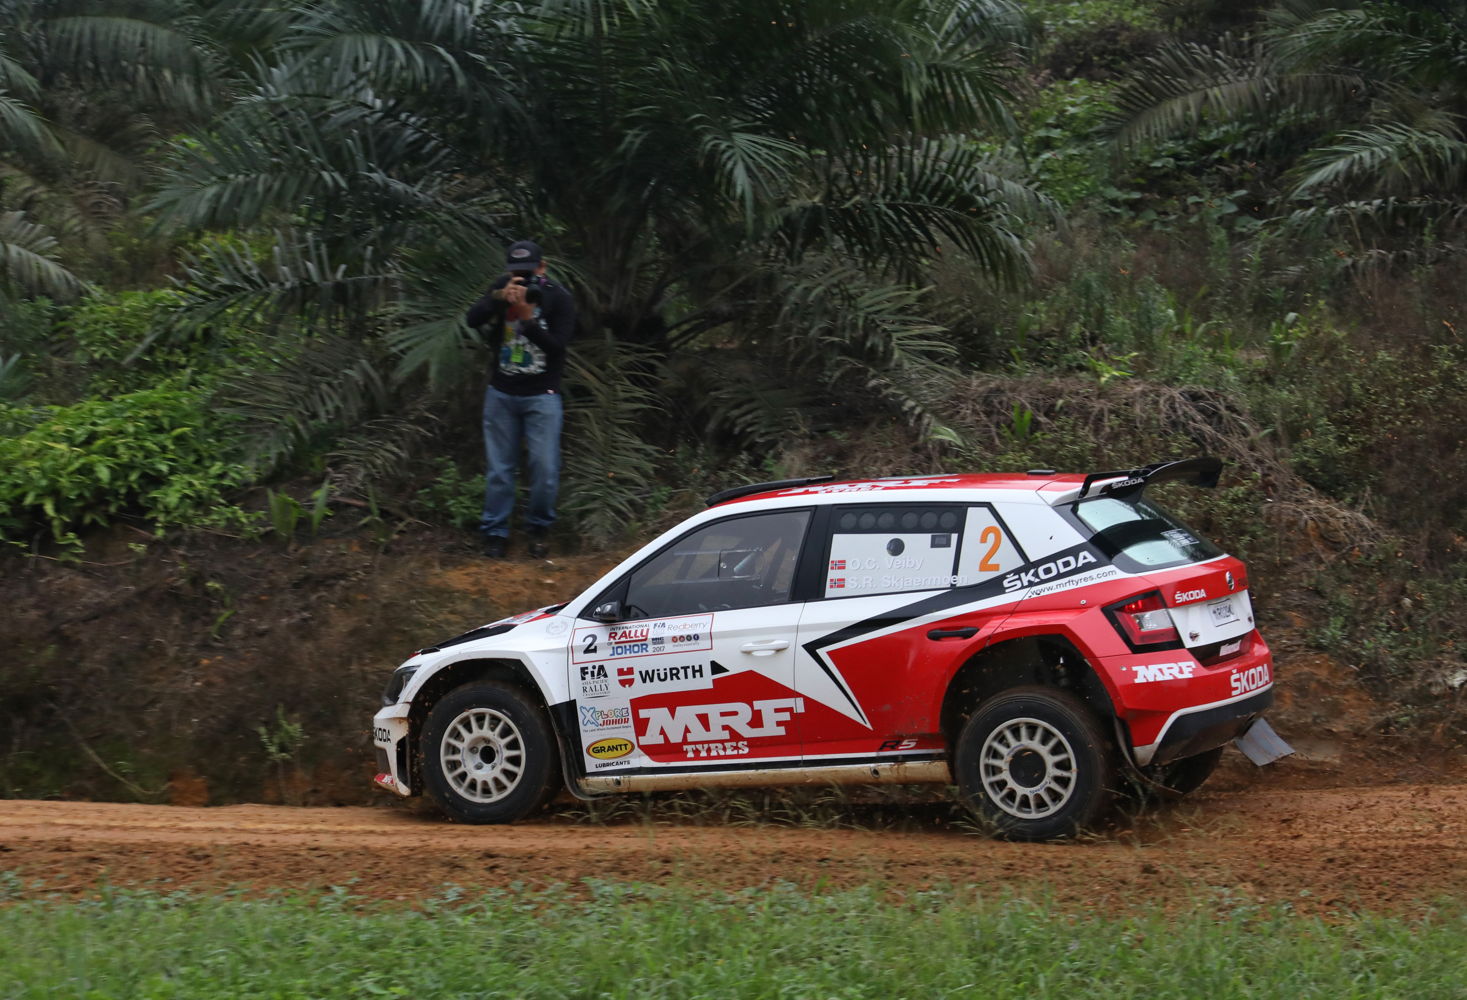 Ole Christian Veiby and co-driver Stig Rune Skjærmoen from Norway want to win the FIA Asia-Pacific Rally Championship with their MRF ŠKODA FABIA R5.